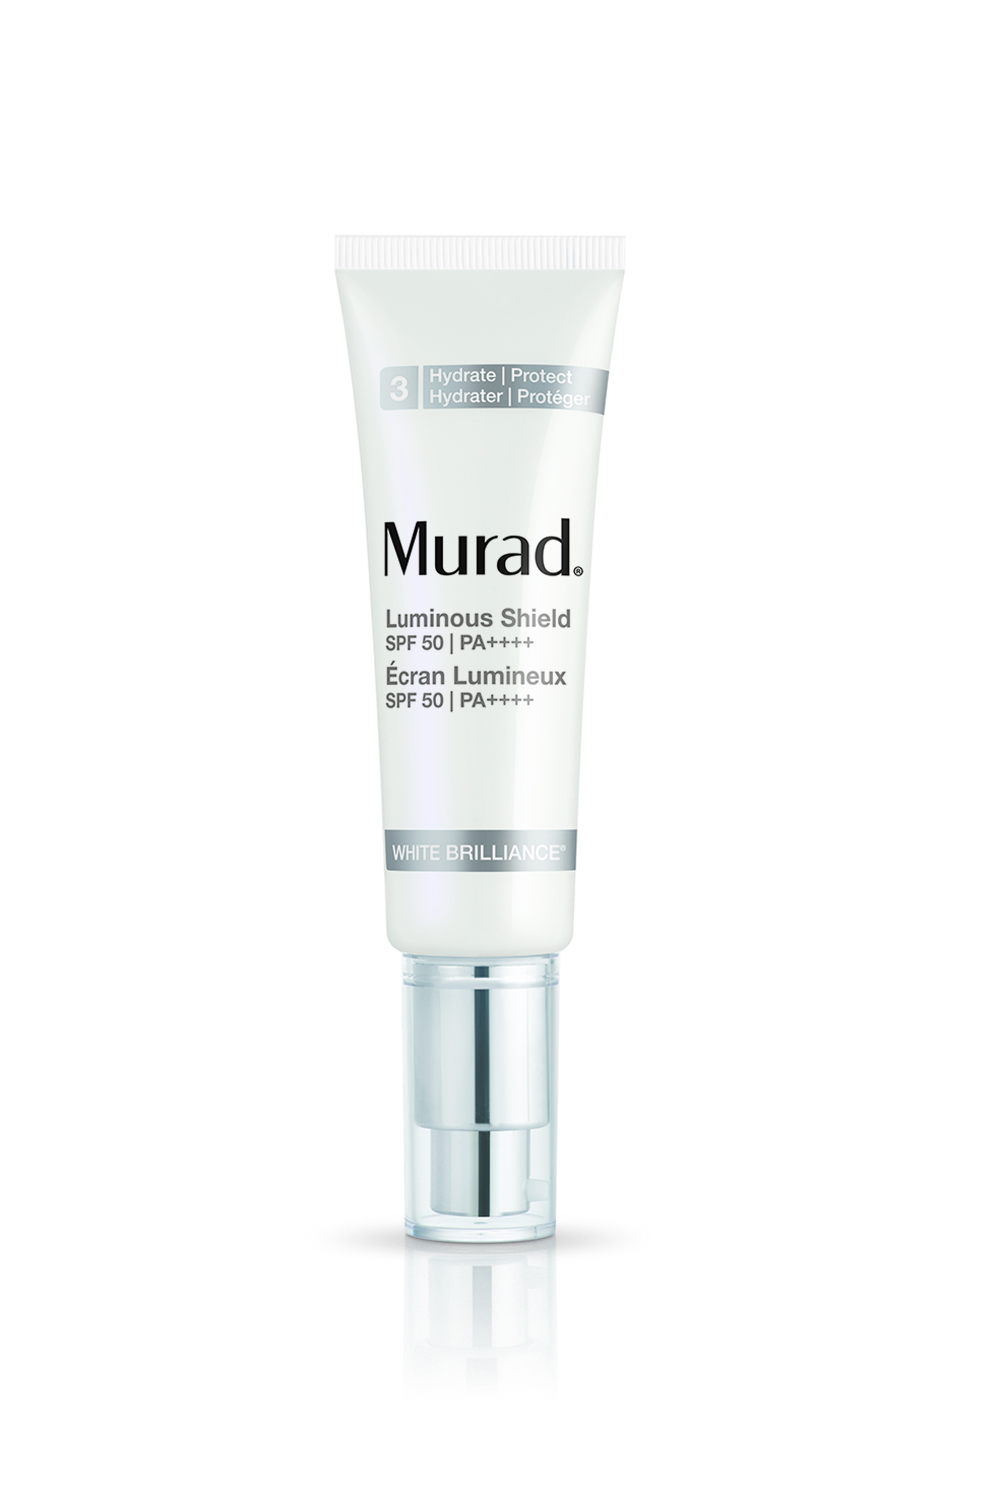 The protector: A sunscreen that evens skin tone, diffuses lines as well as protecting it from further UV damage with a generous sun protection factor, Murad Luminous Shield SPF50, $159, does it all